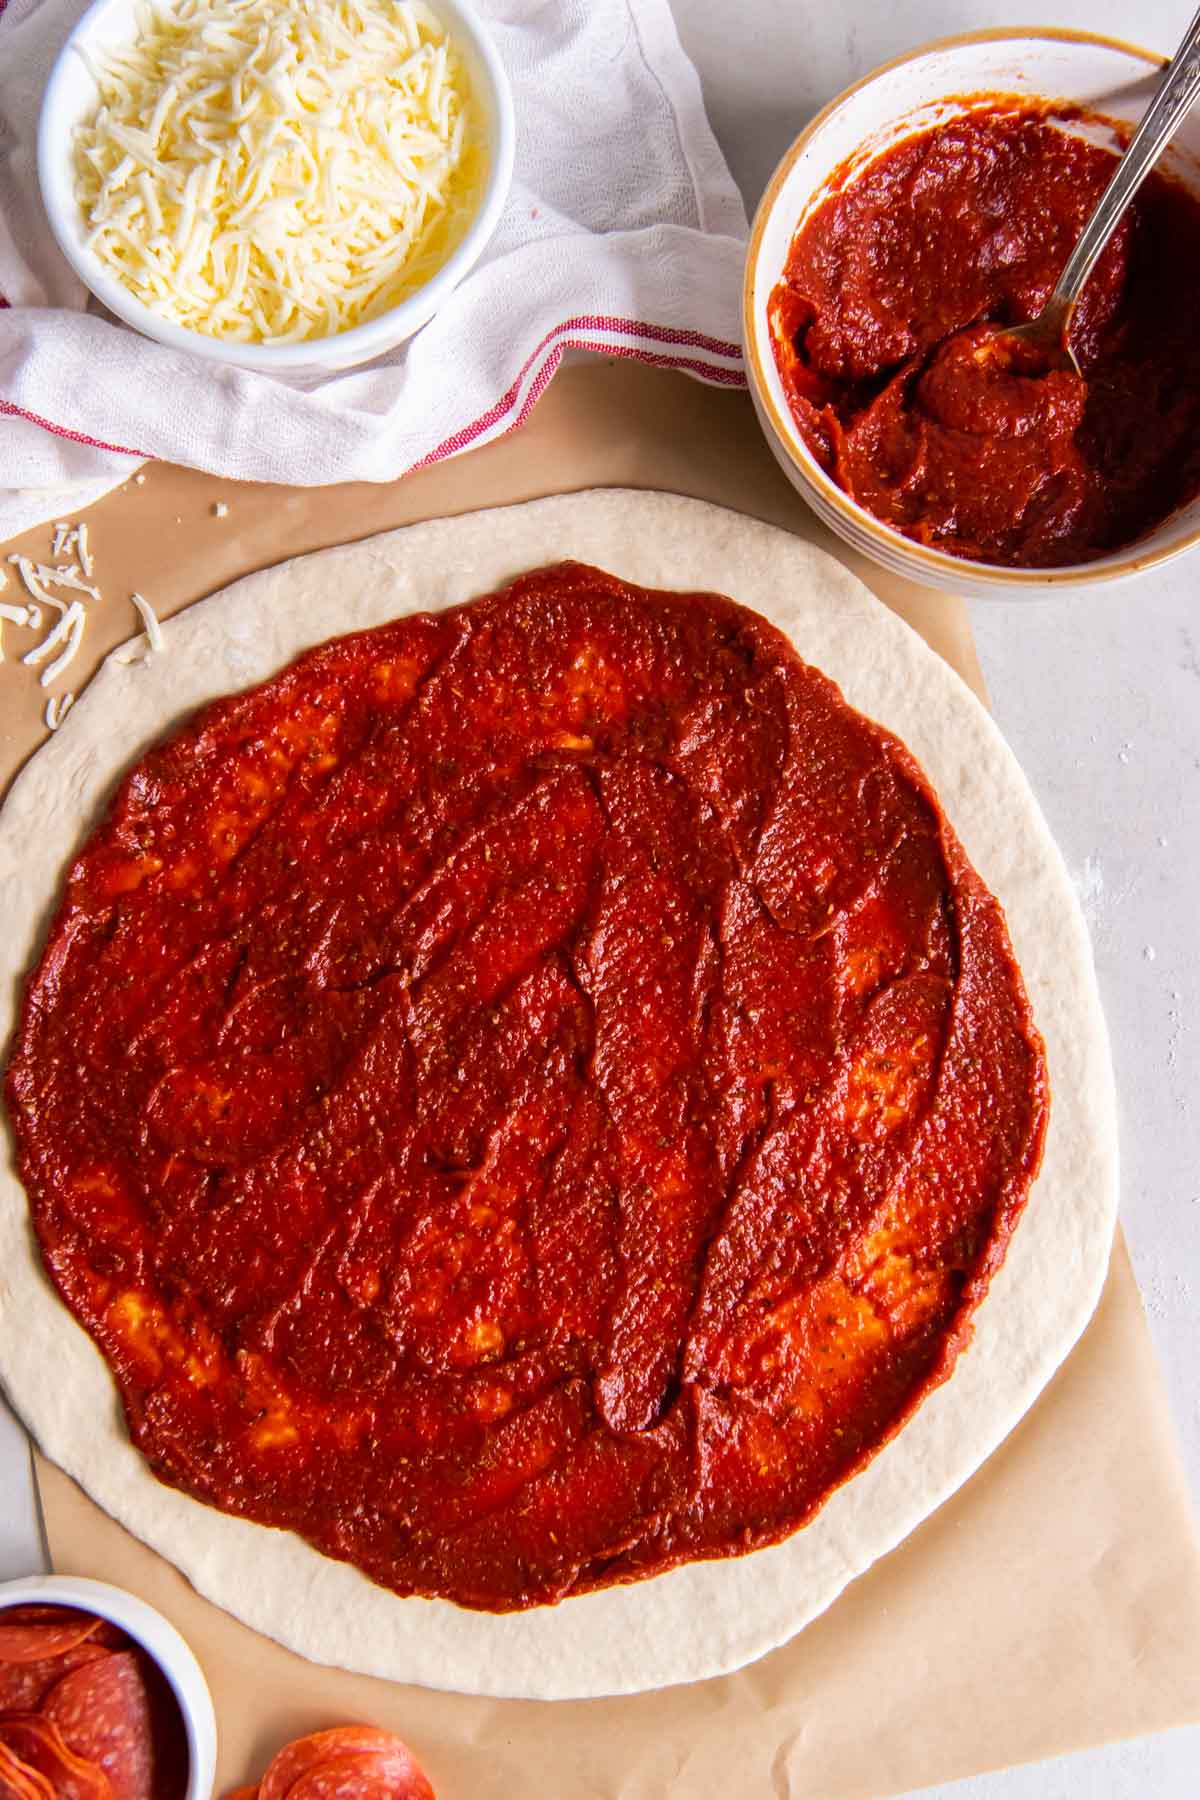 Pizza sauce spread over rolled out pizza dough.